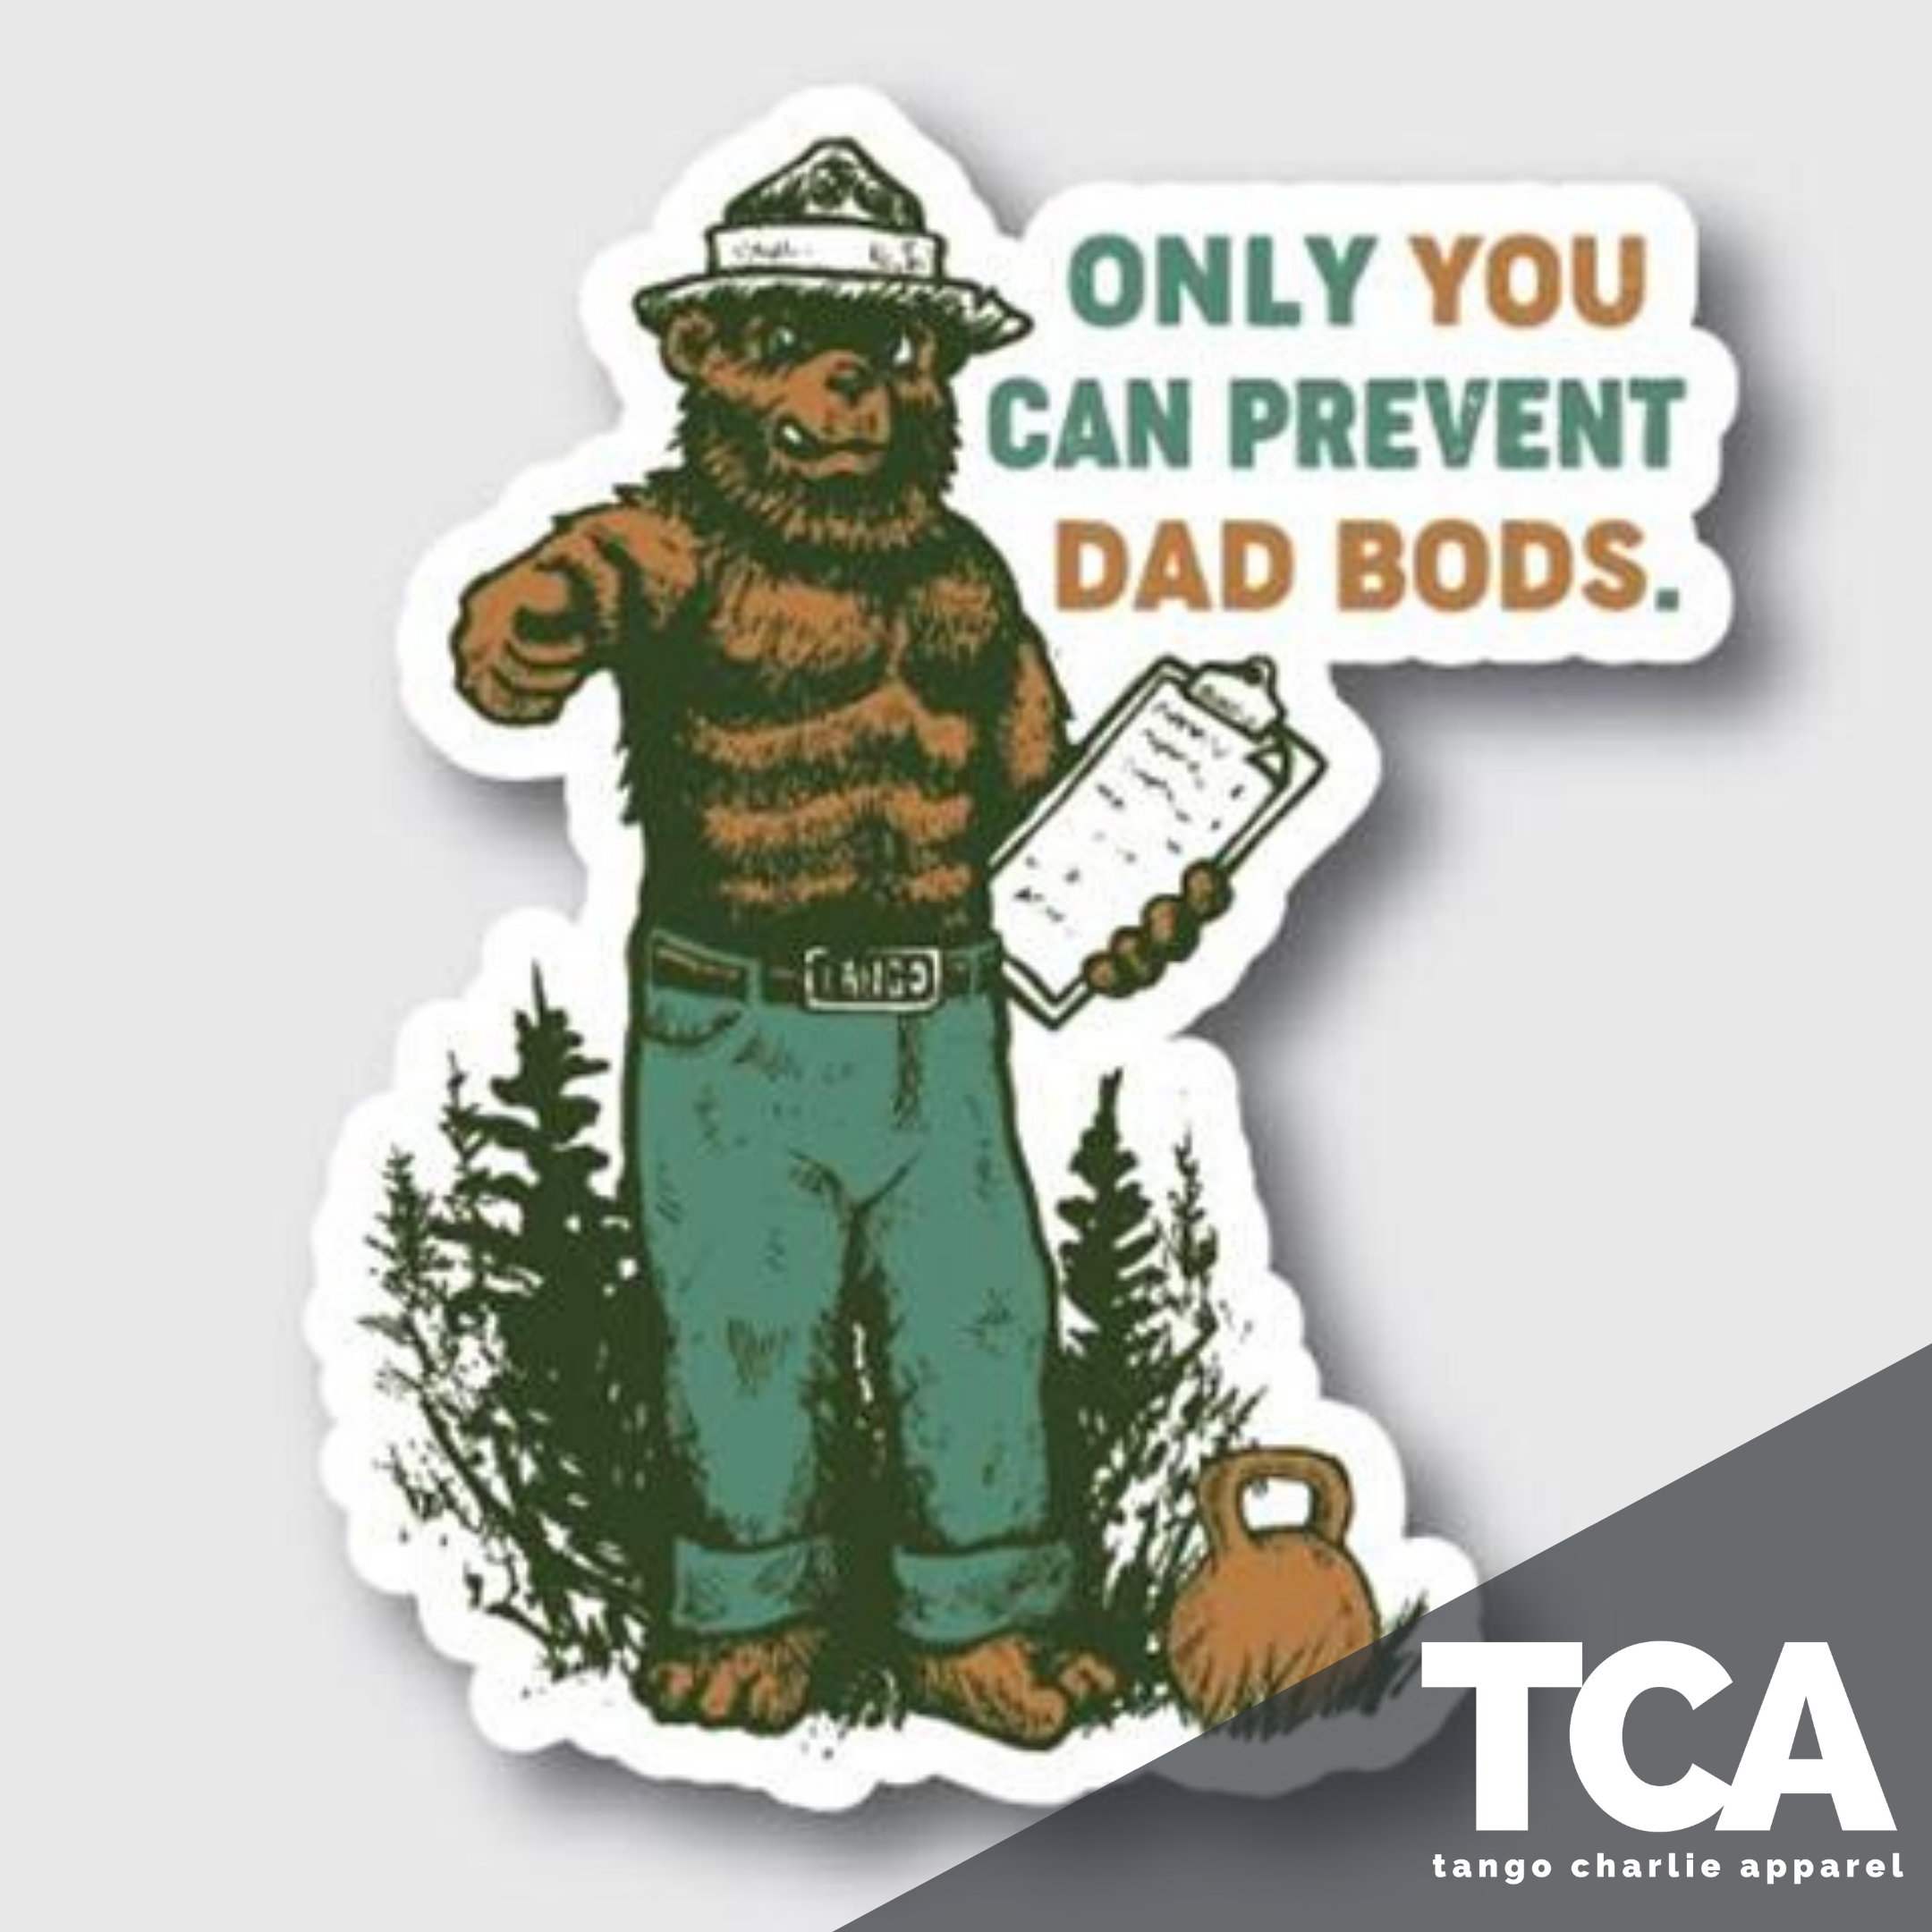 "Only You Can Prevent Dad Bods" - Sticker